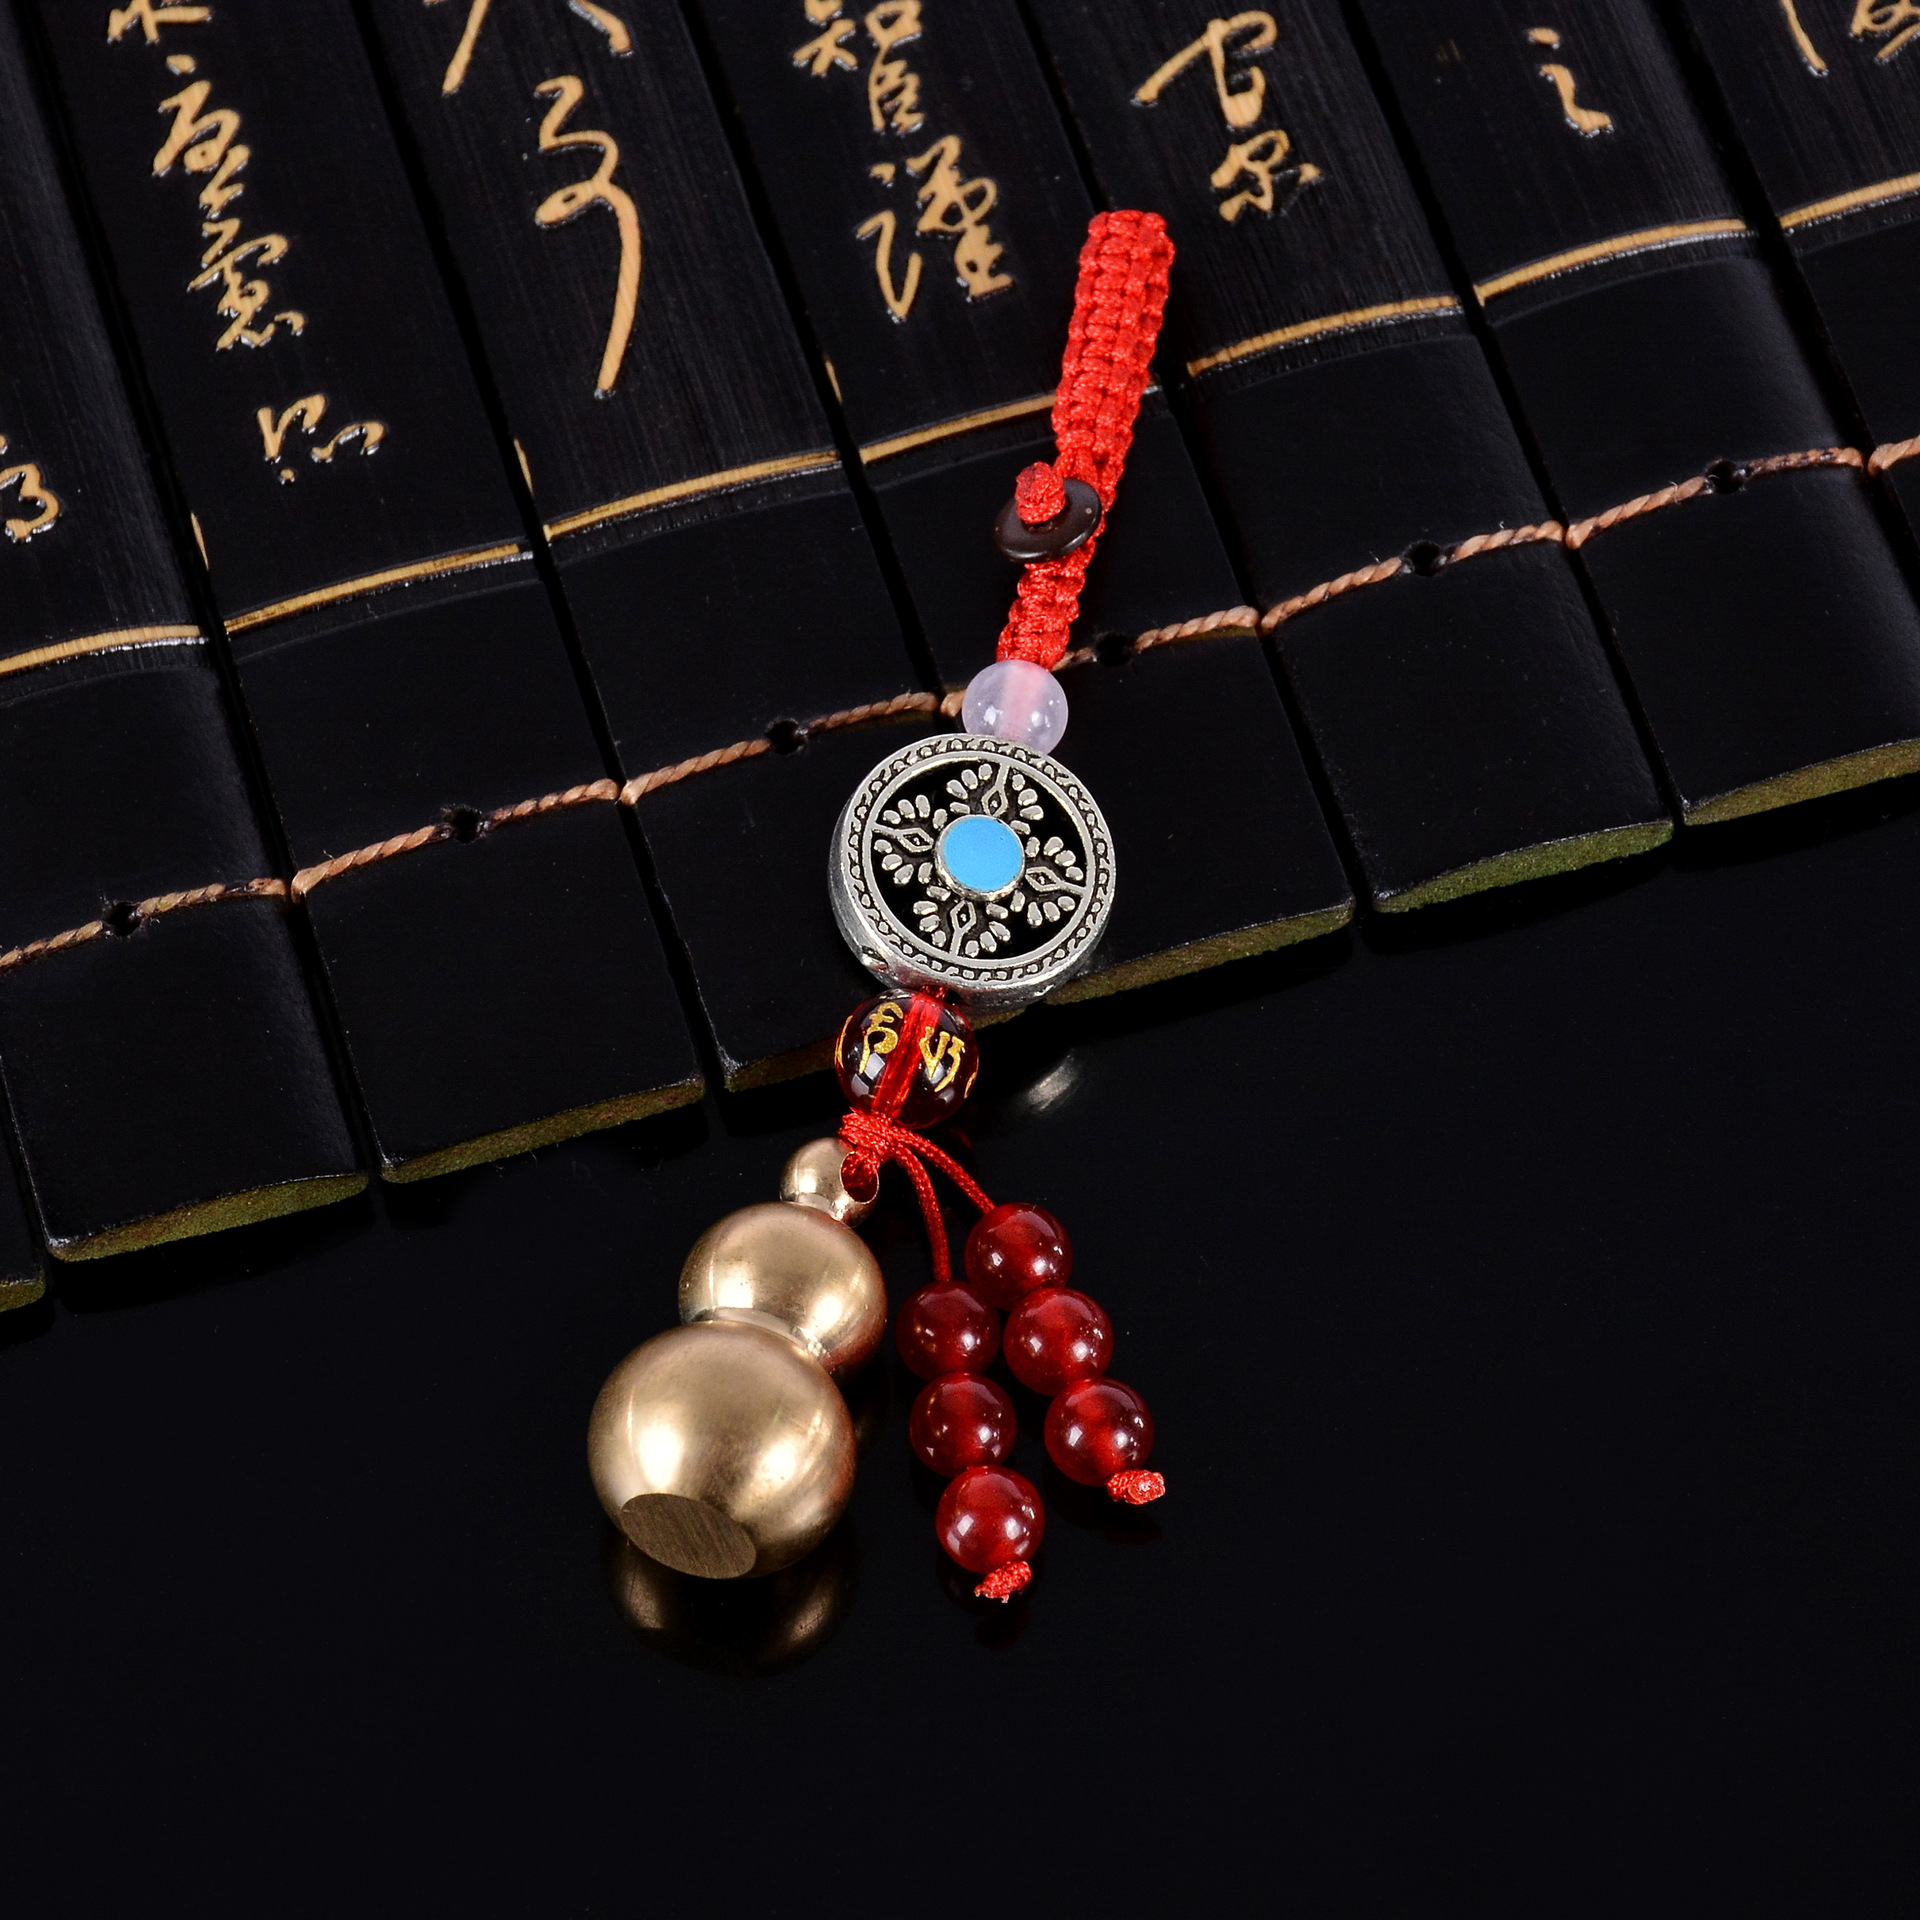 Chinese Knot Can Open Copper Gourd Hanging Gourd Qing Dynasty Five Emperors' Coins Automobile Hanging Ornament Gourd Listing